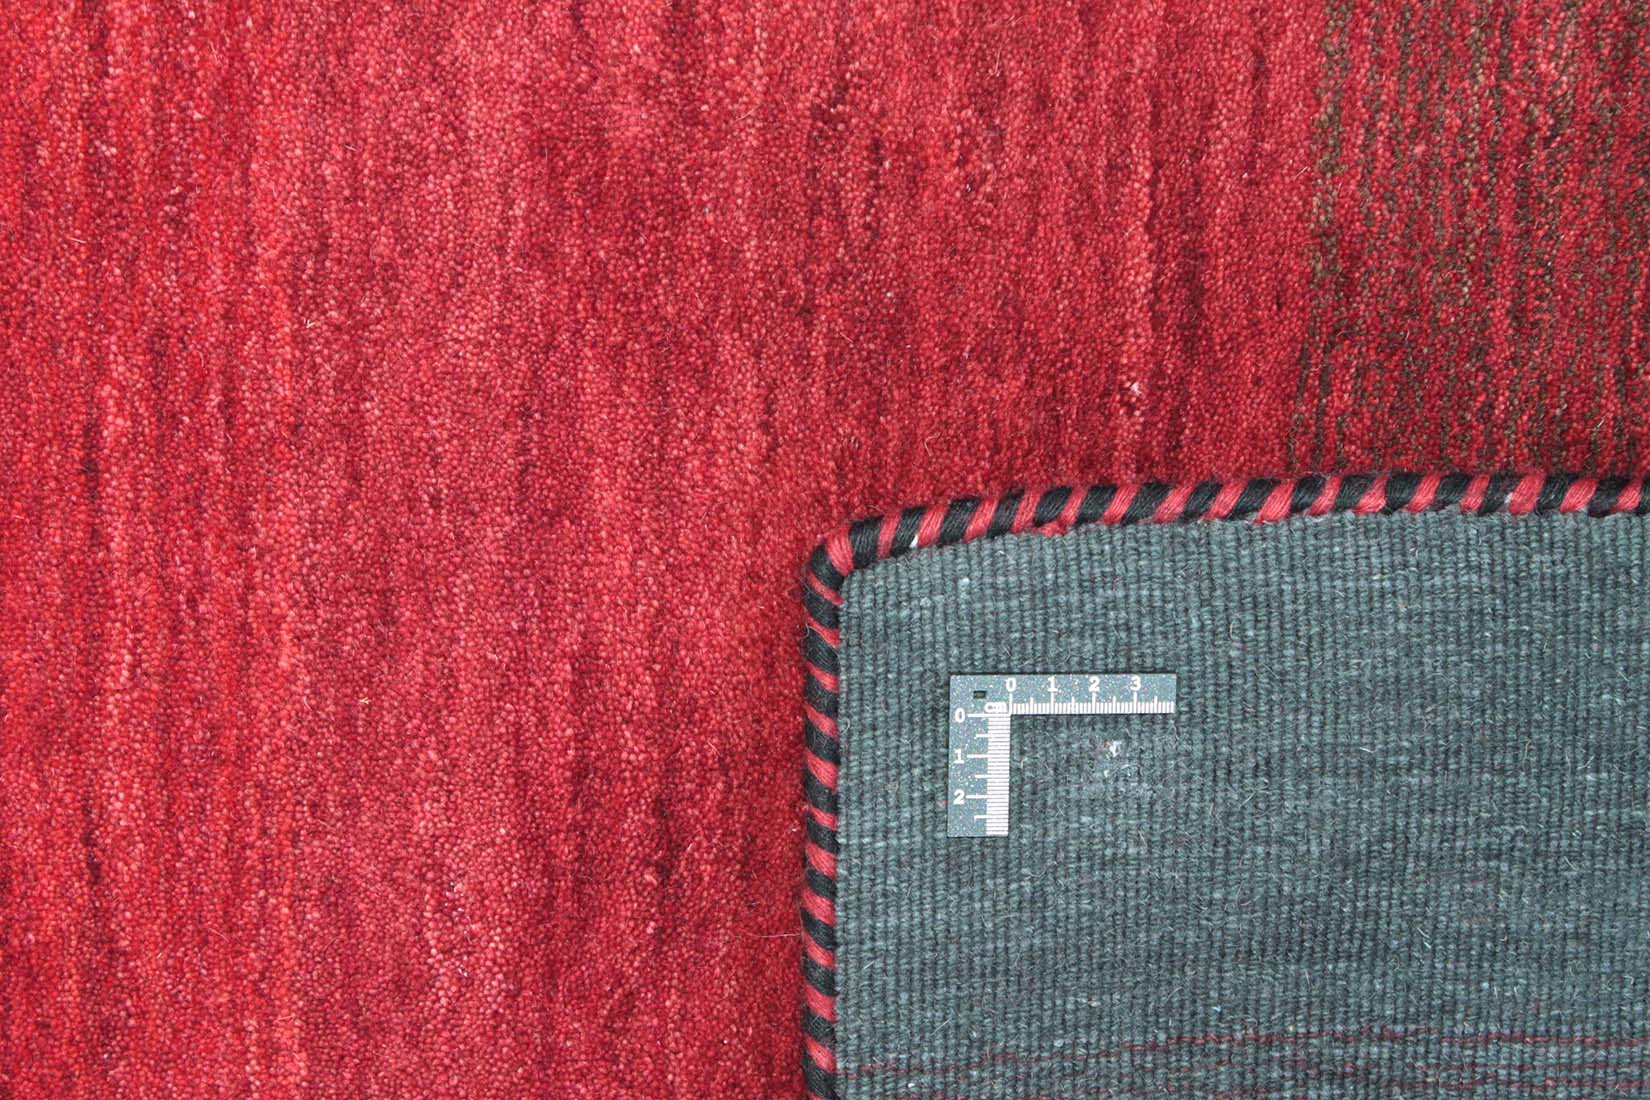 red and black ombre rug
